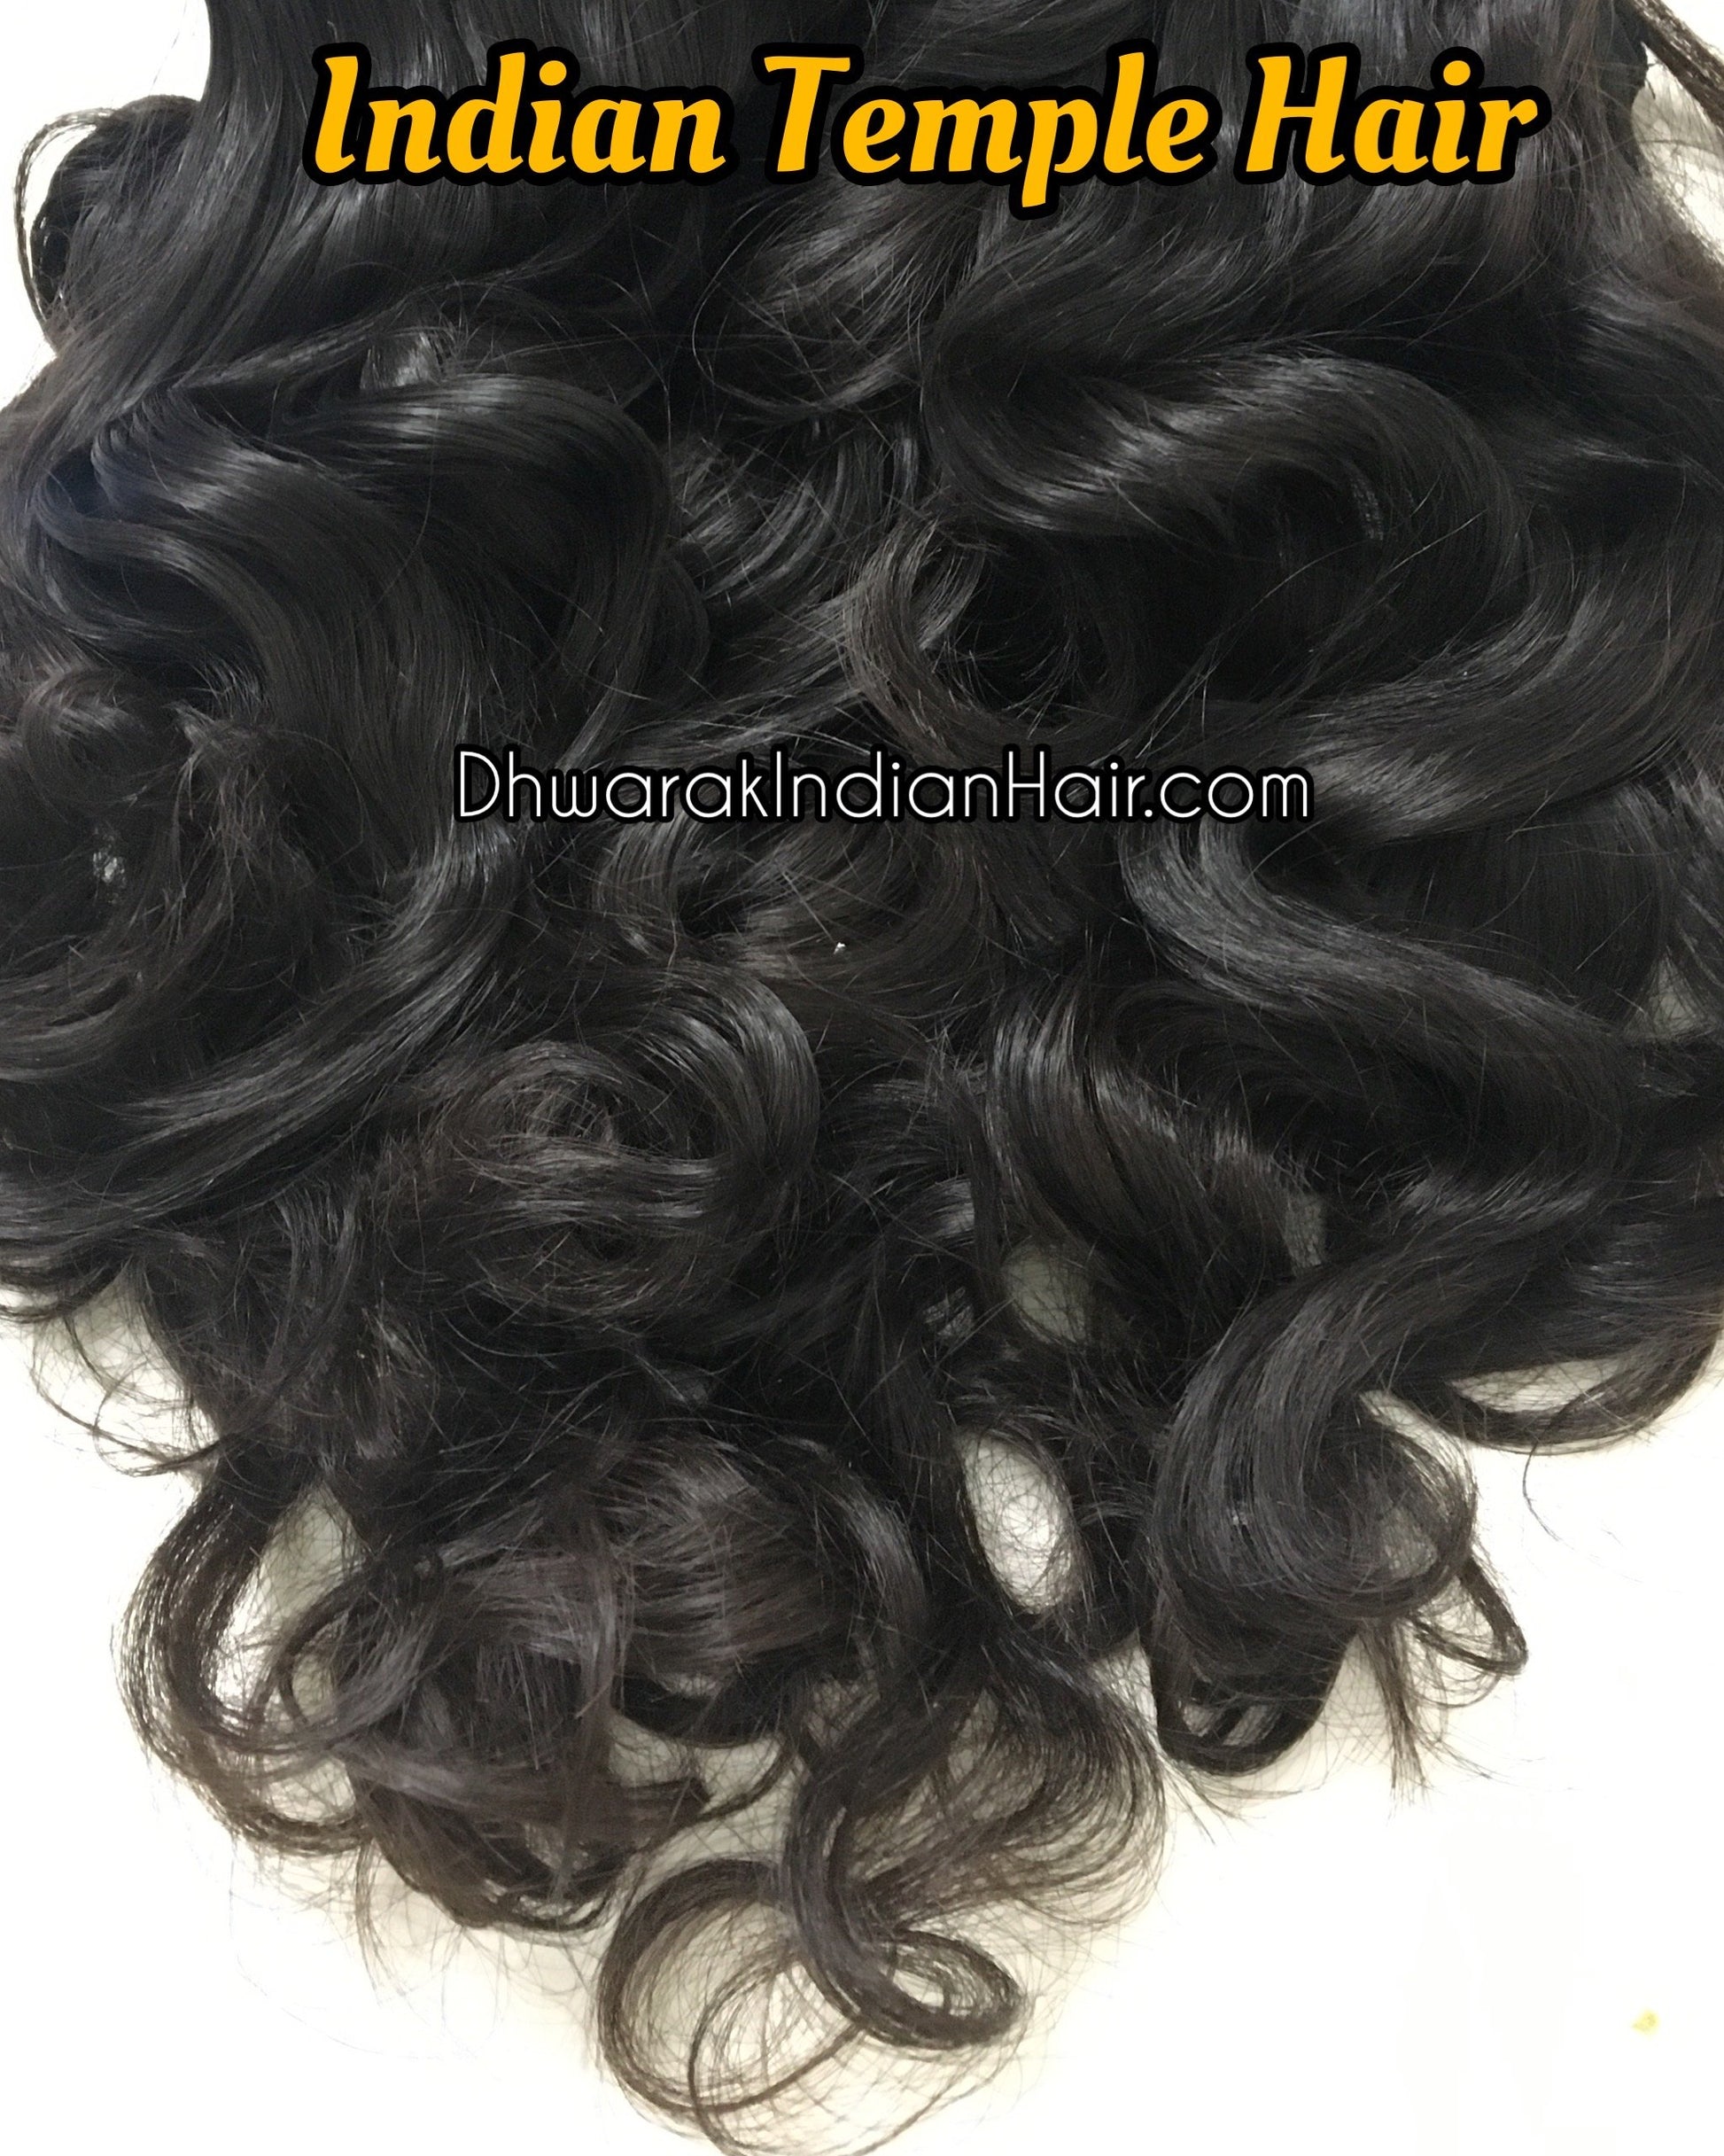 Raw Indian hair vendor wholesale - hair extensions